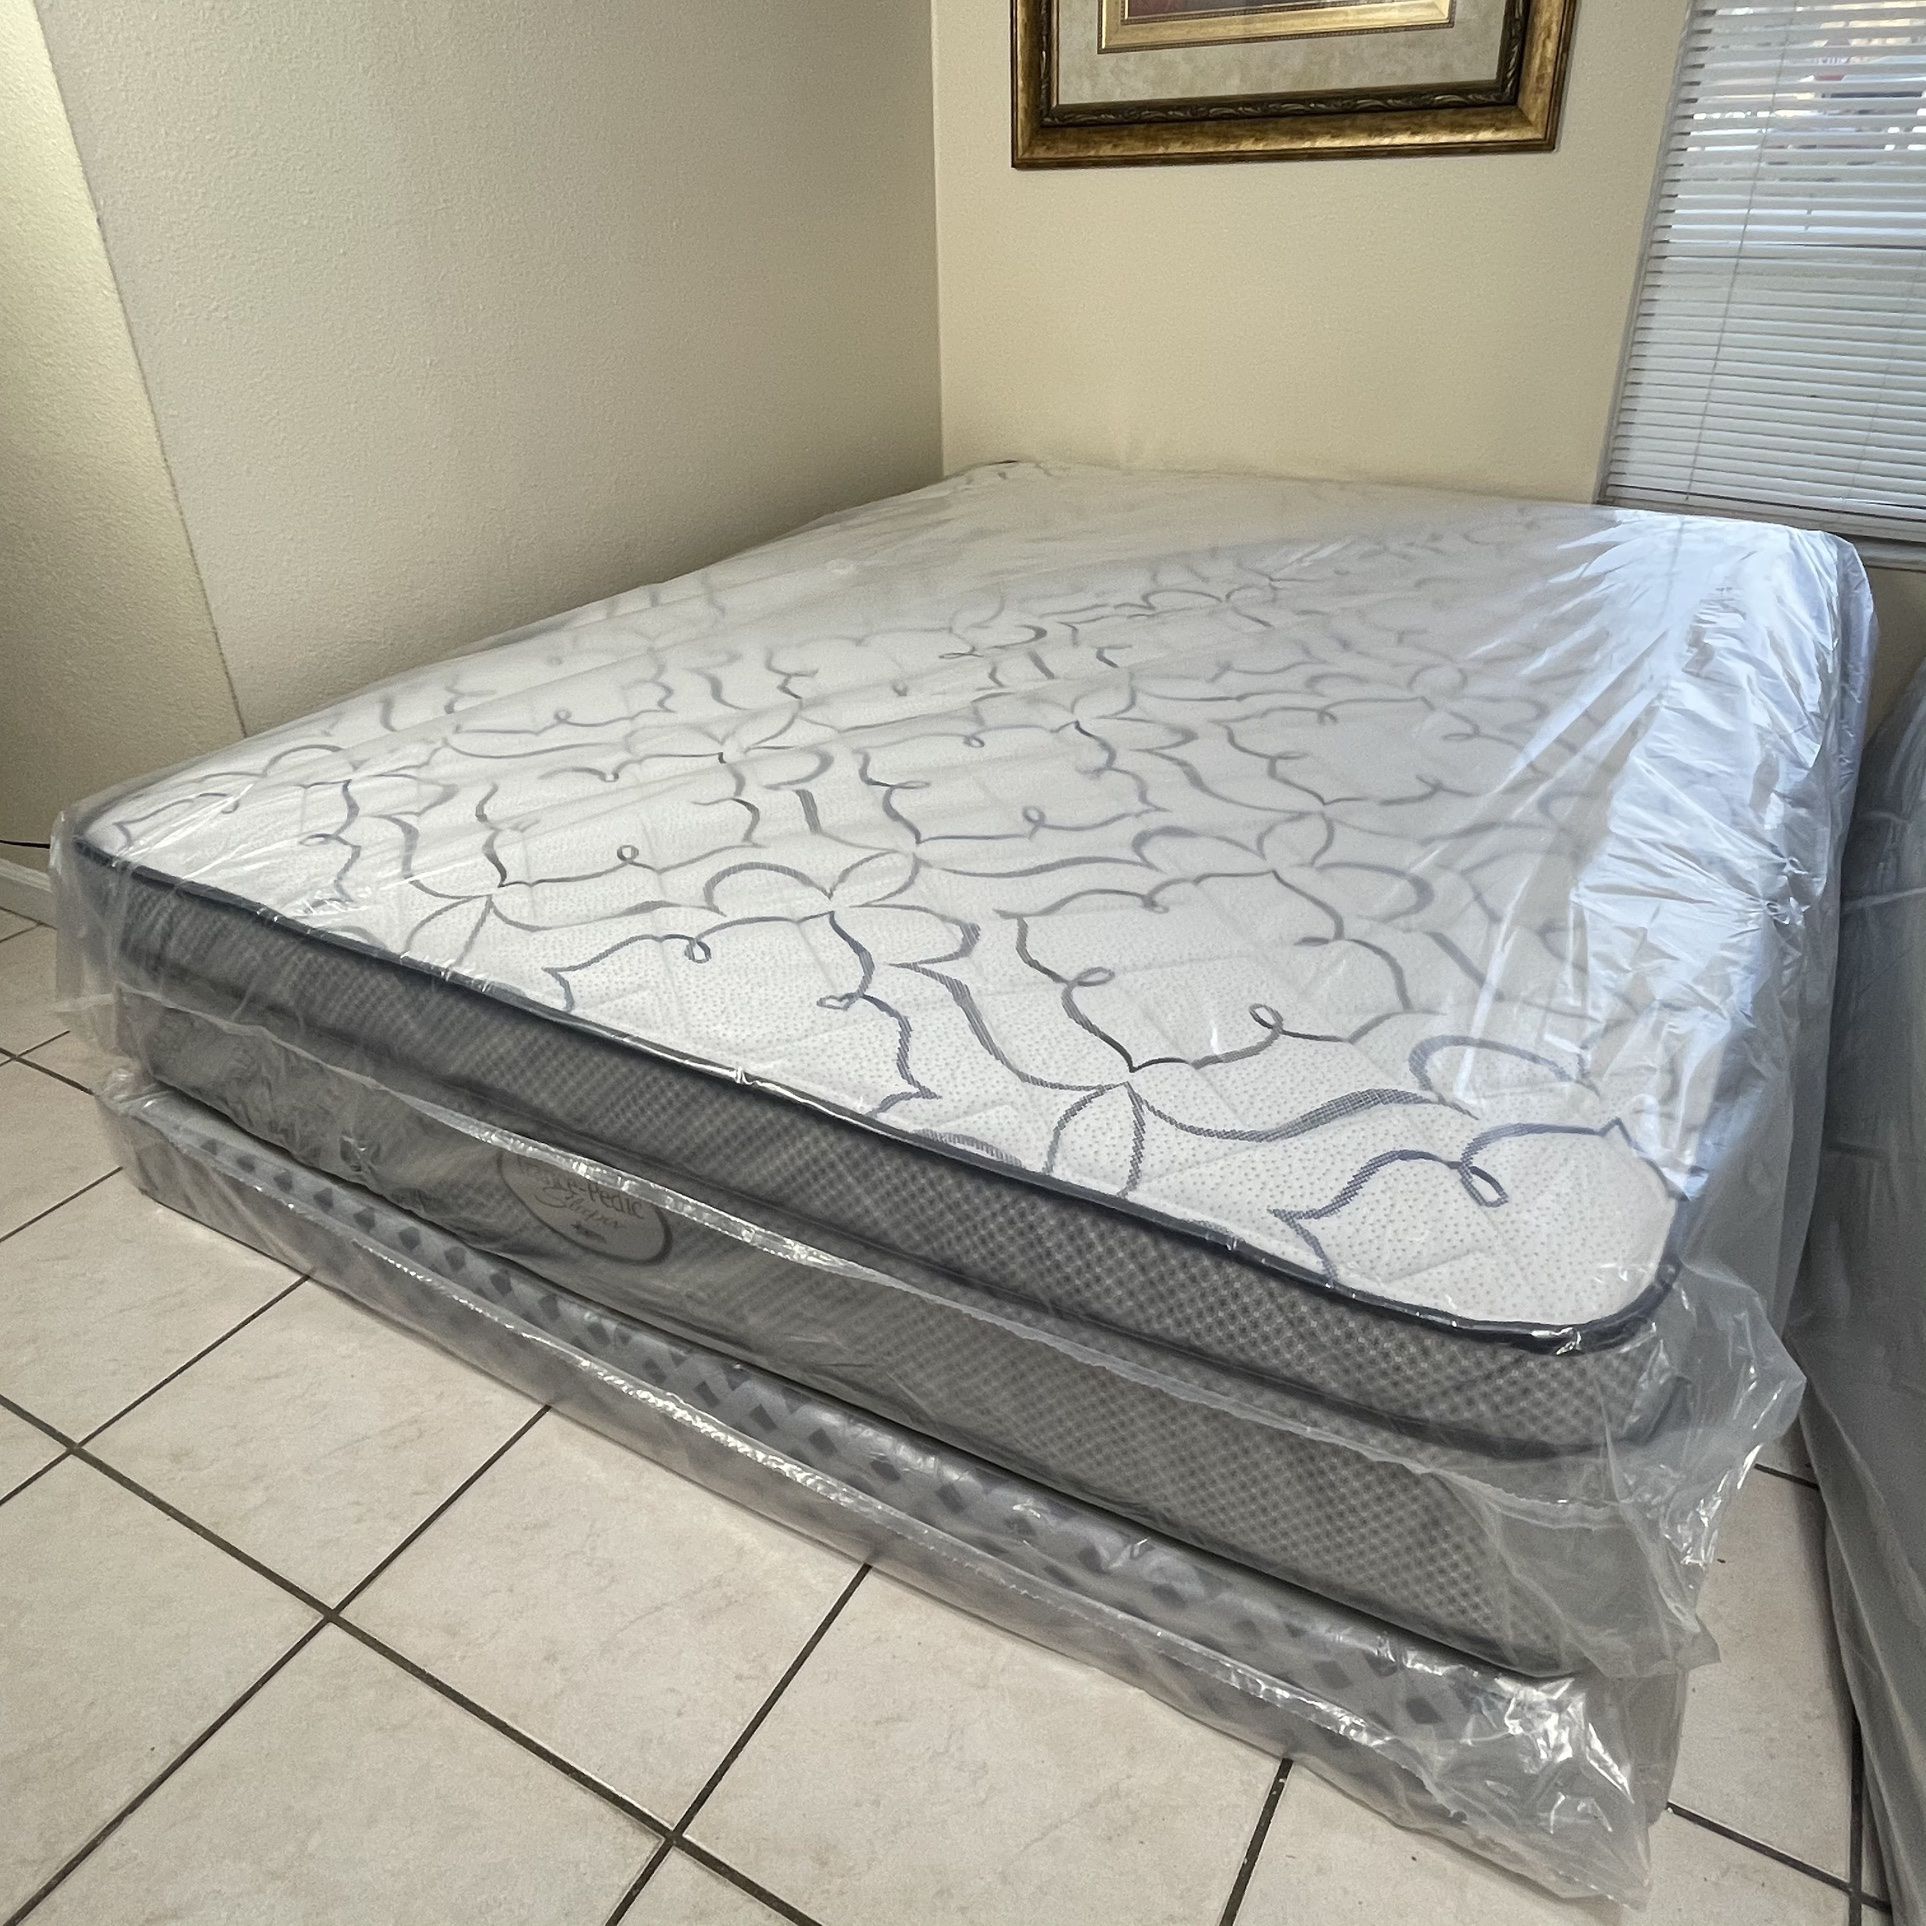 New Queen 12 Inch Pillowtop Mattress And boxspring Set! FREE SAME DAY DELIVERY 